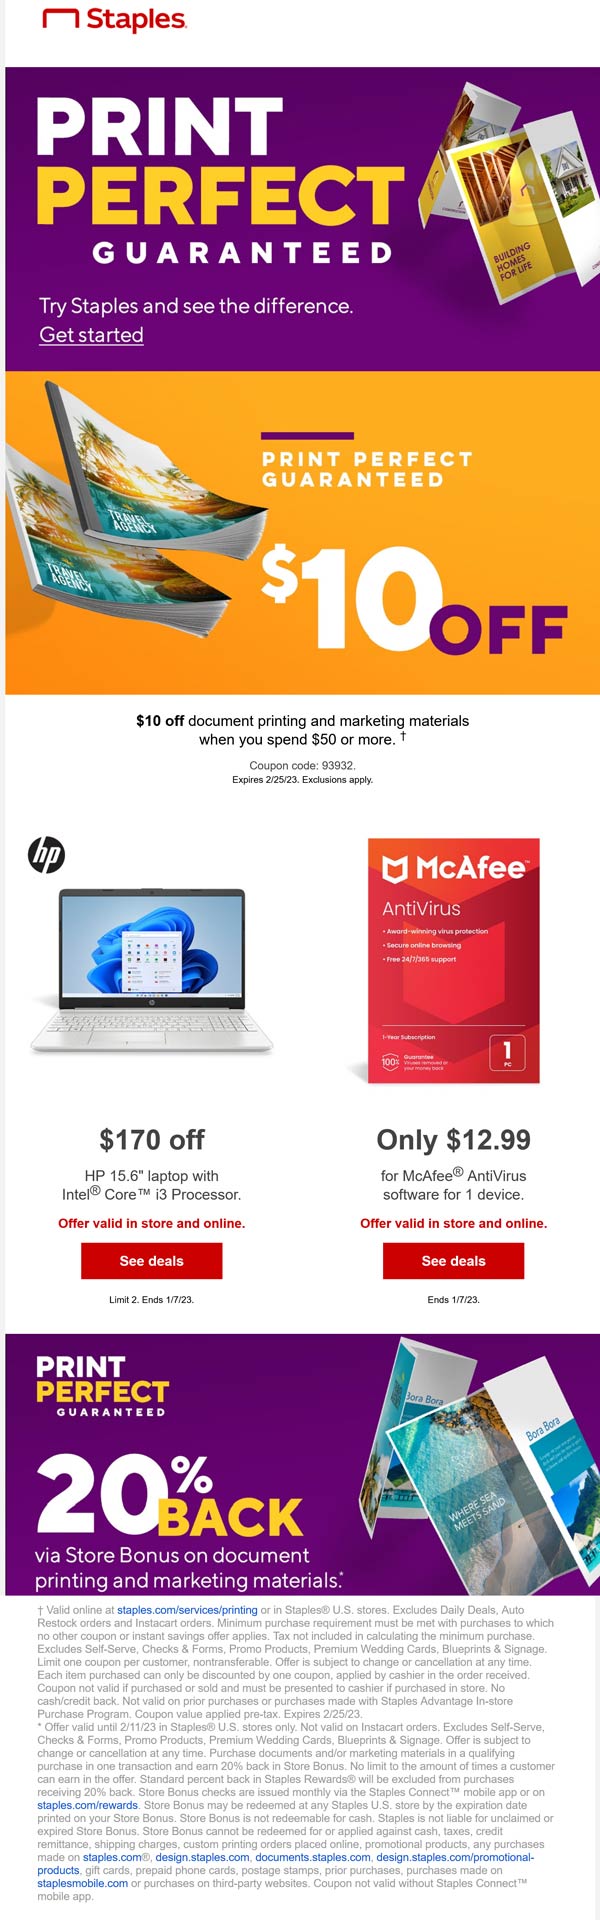 Staples stores Coupon  $10 off $50 on document printing and marketing materials at Staples via promo code 93932 #staples 